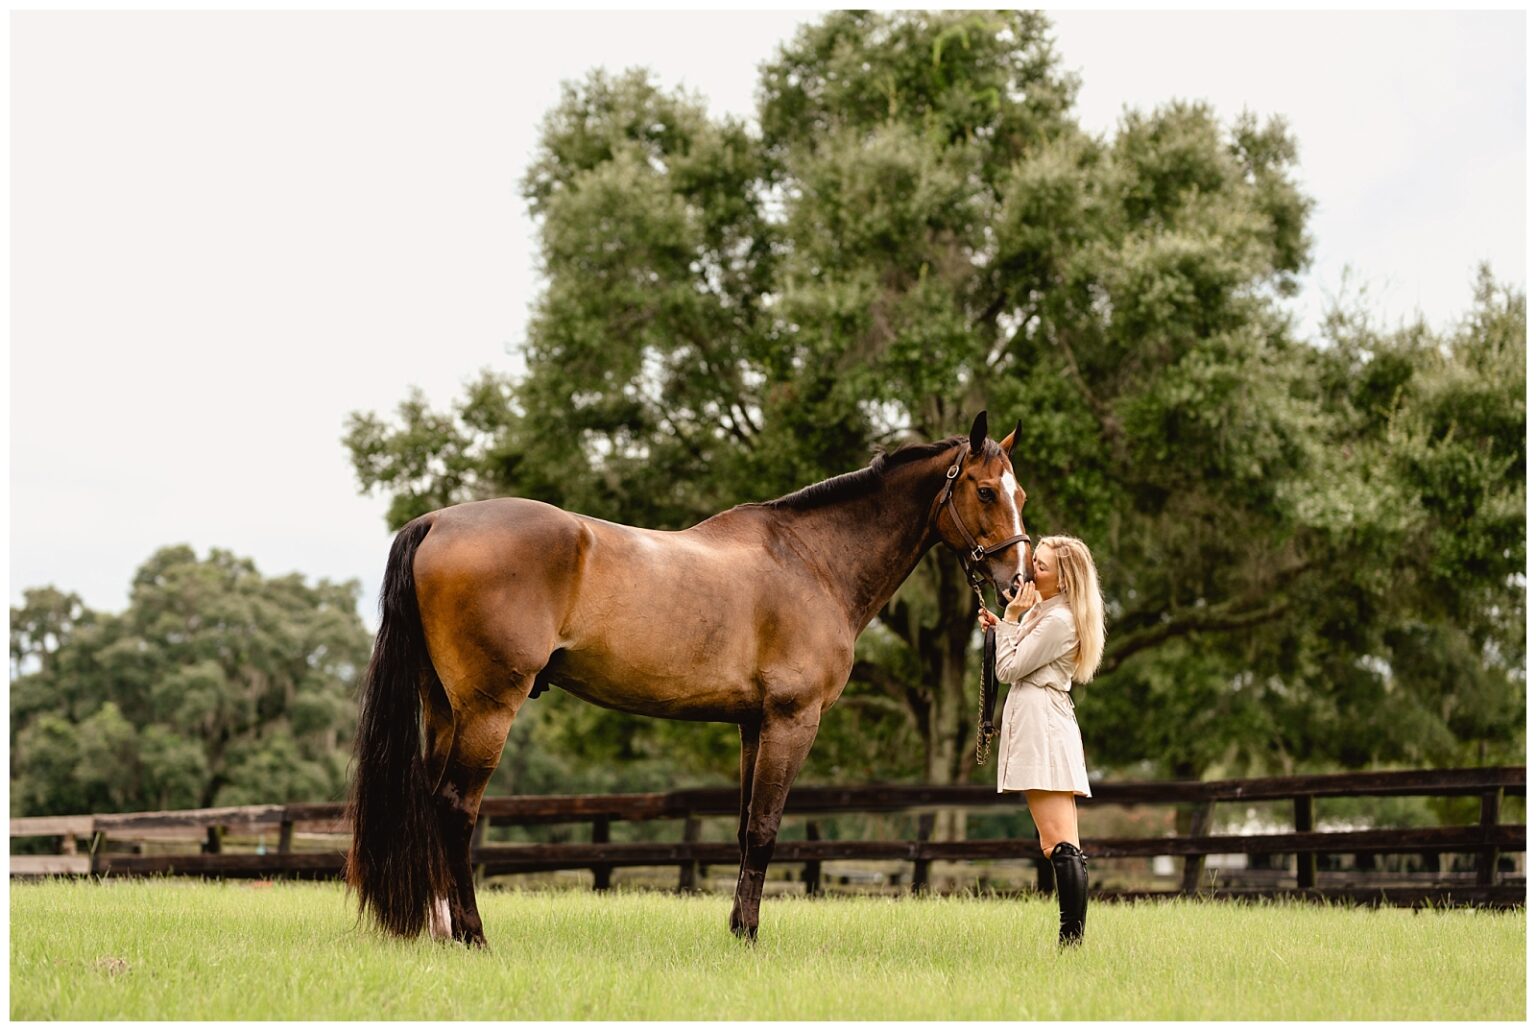 Ocala photoshoot with Horse and Rider. Equestrian styled outfit with dress from Odette Boutique, paired with tall boots.